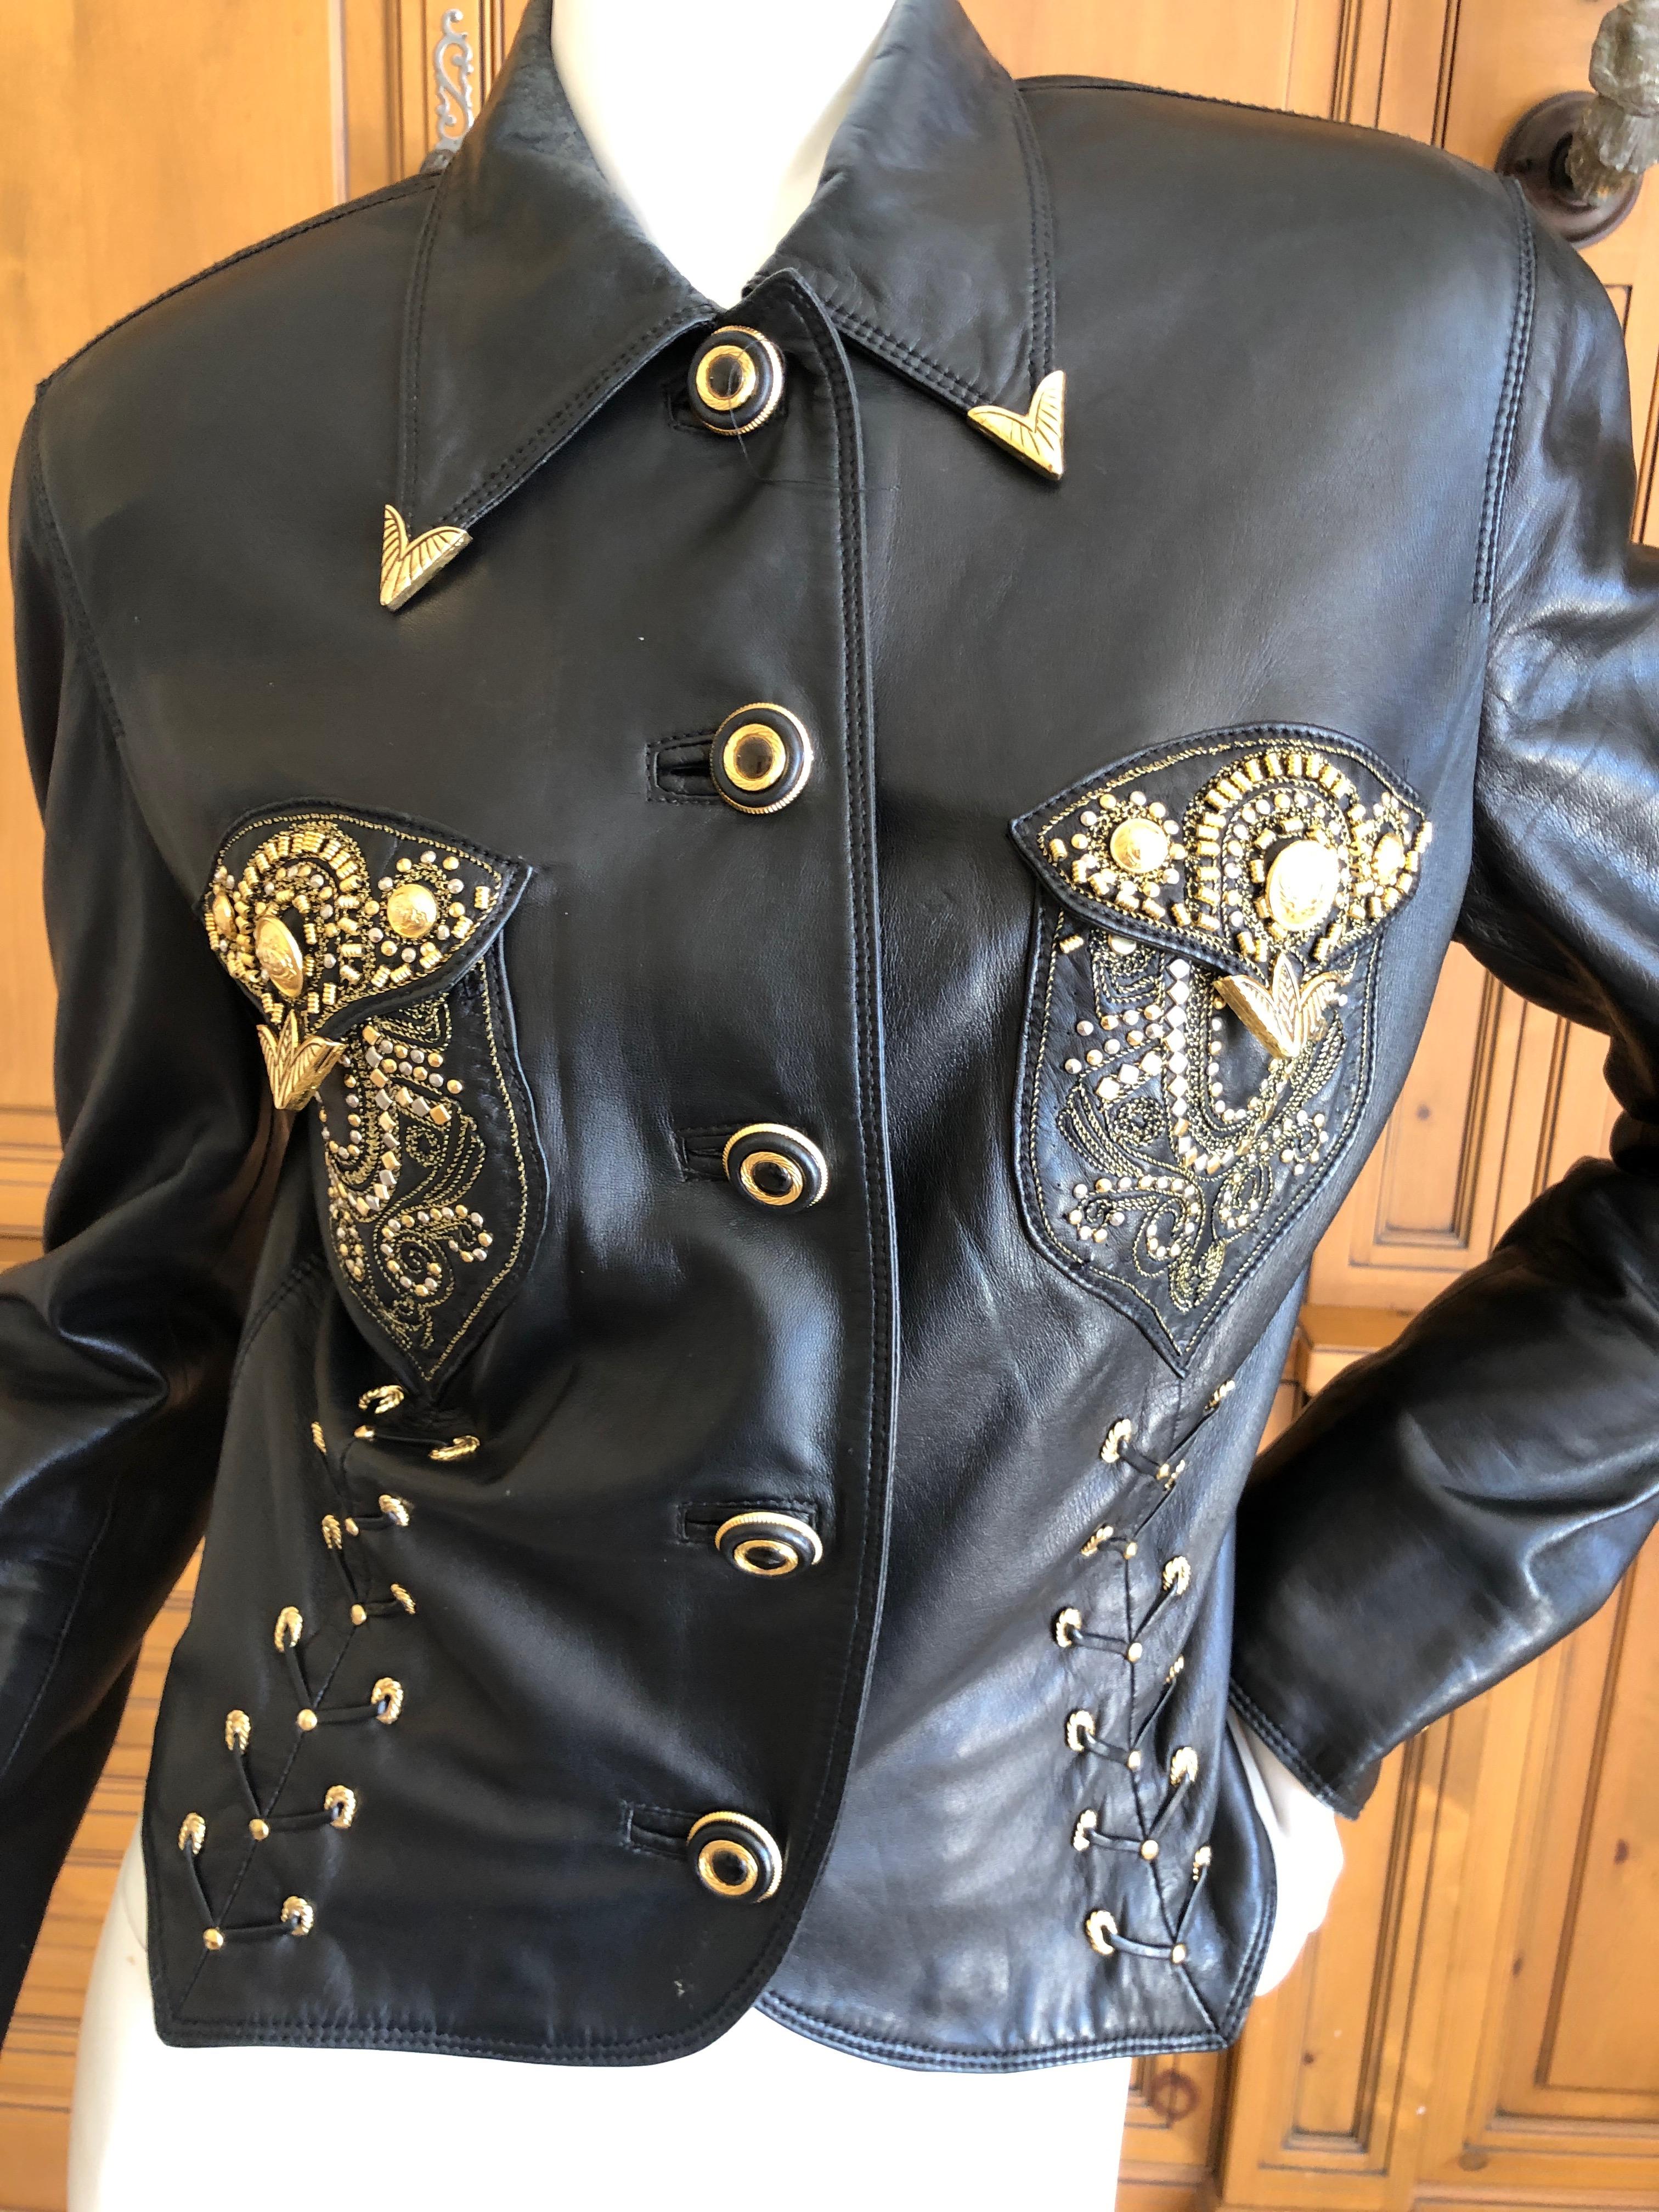 Women's or Men's Gianni Versace 1990 Lambskin Leather Moto Jacket with Gold Embellishment For Sale